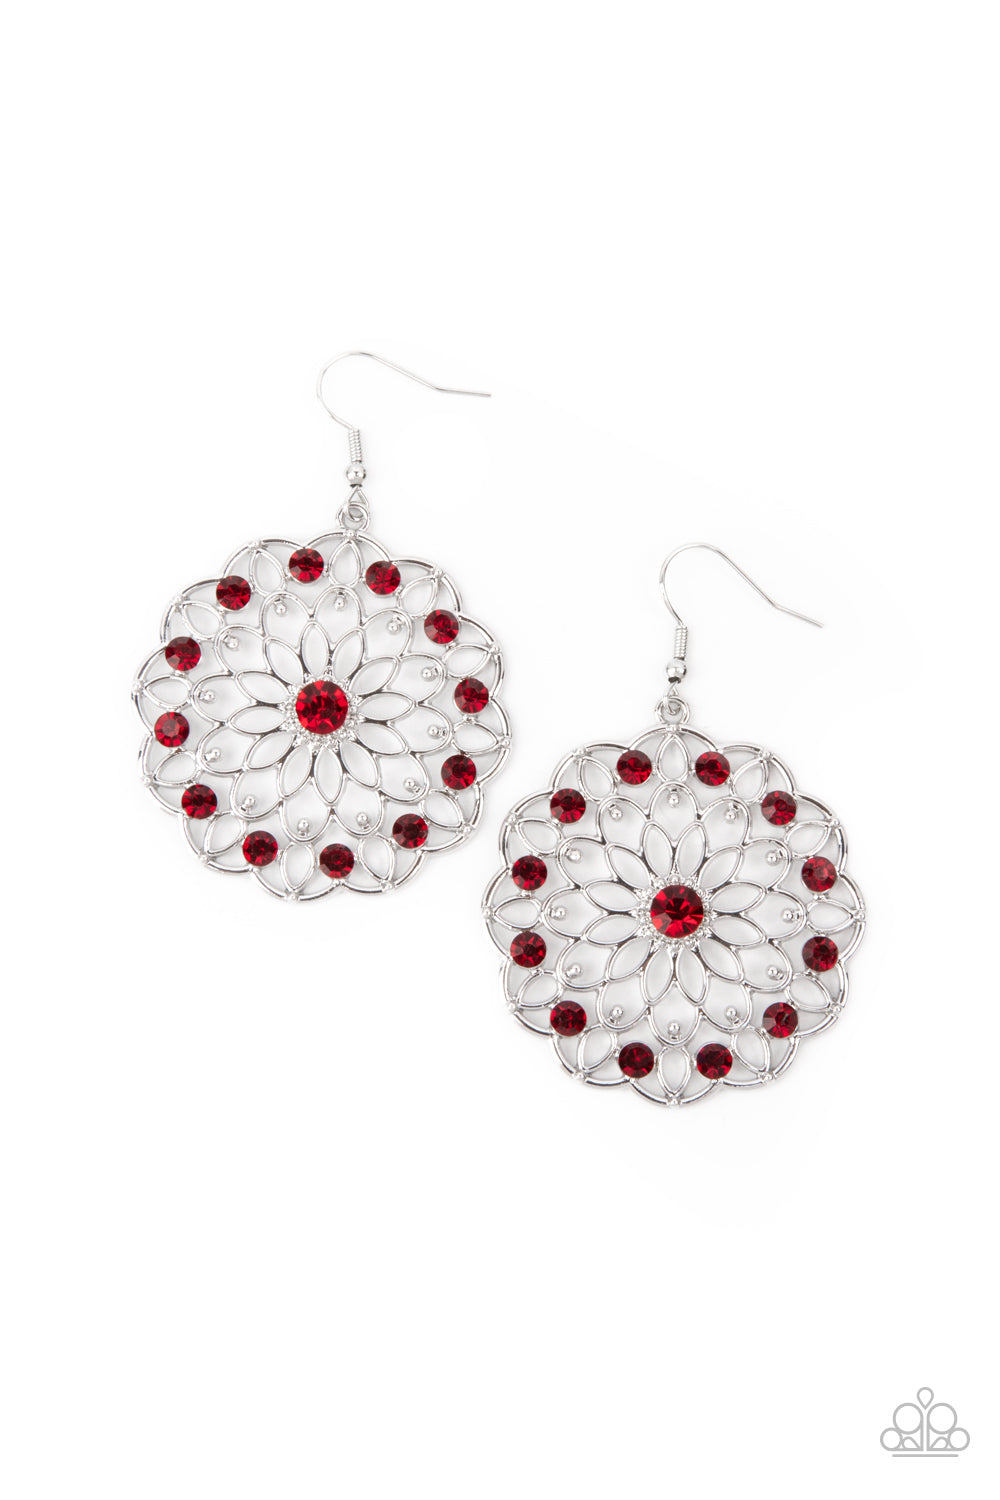 Paparazzi Accessories Posy Proposal - Red Earrings - Lady T Accessories